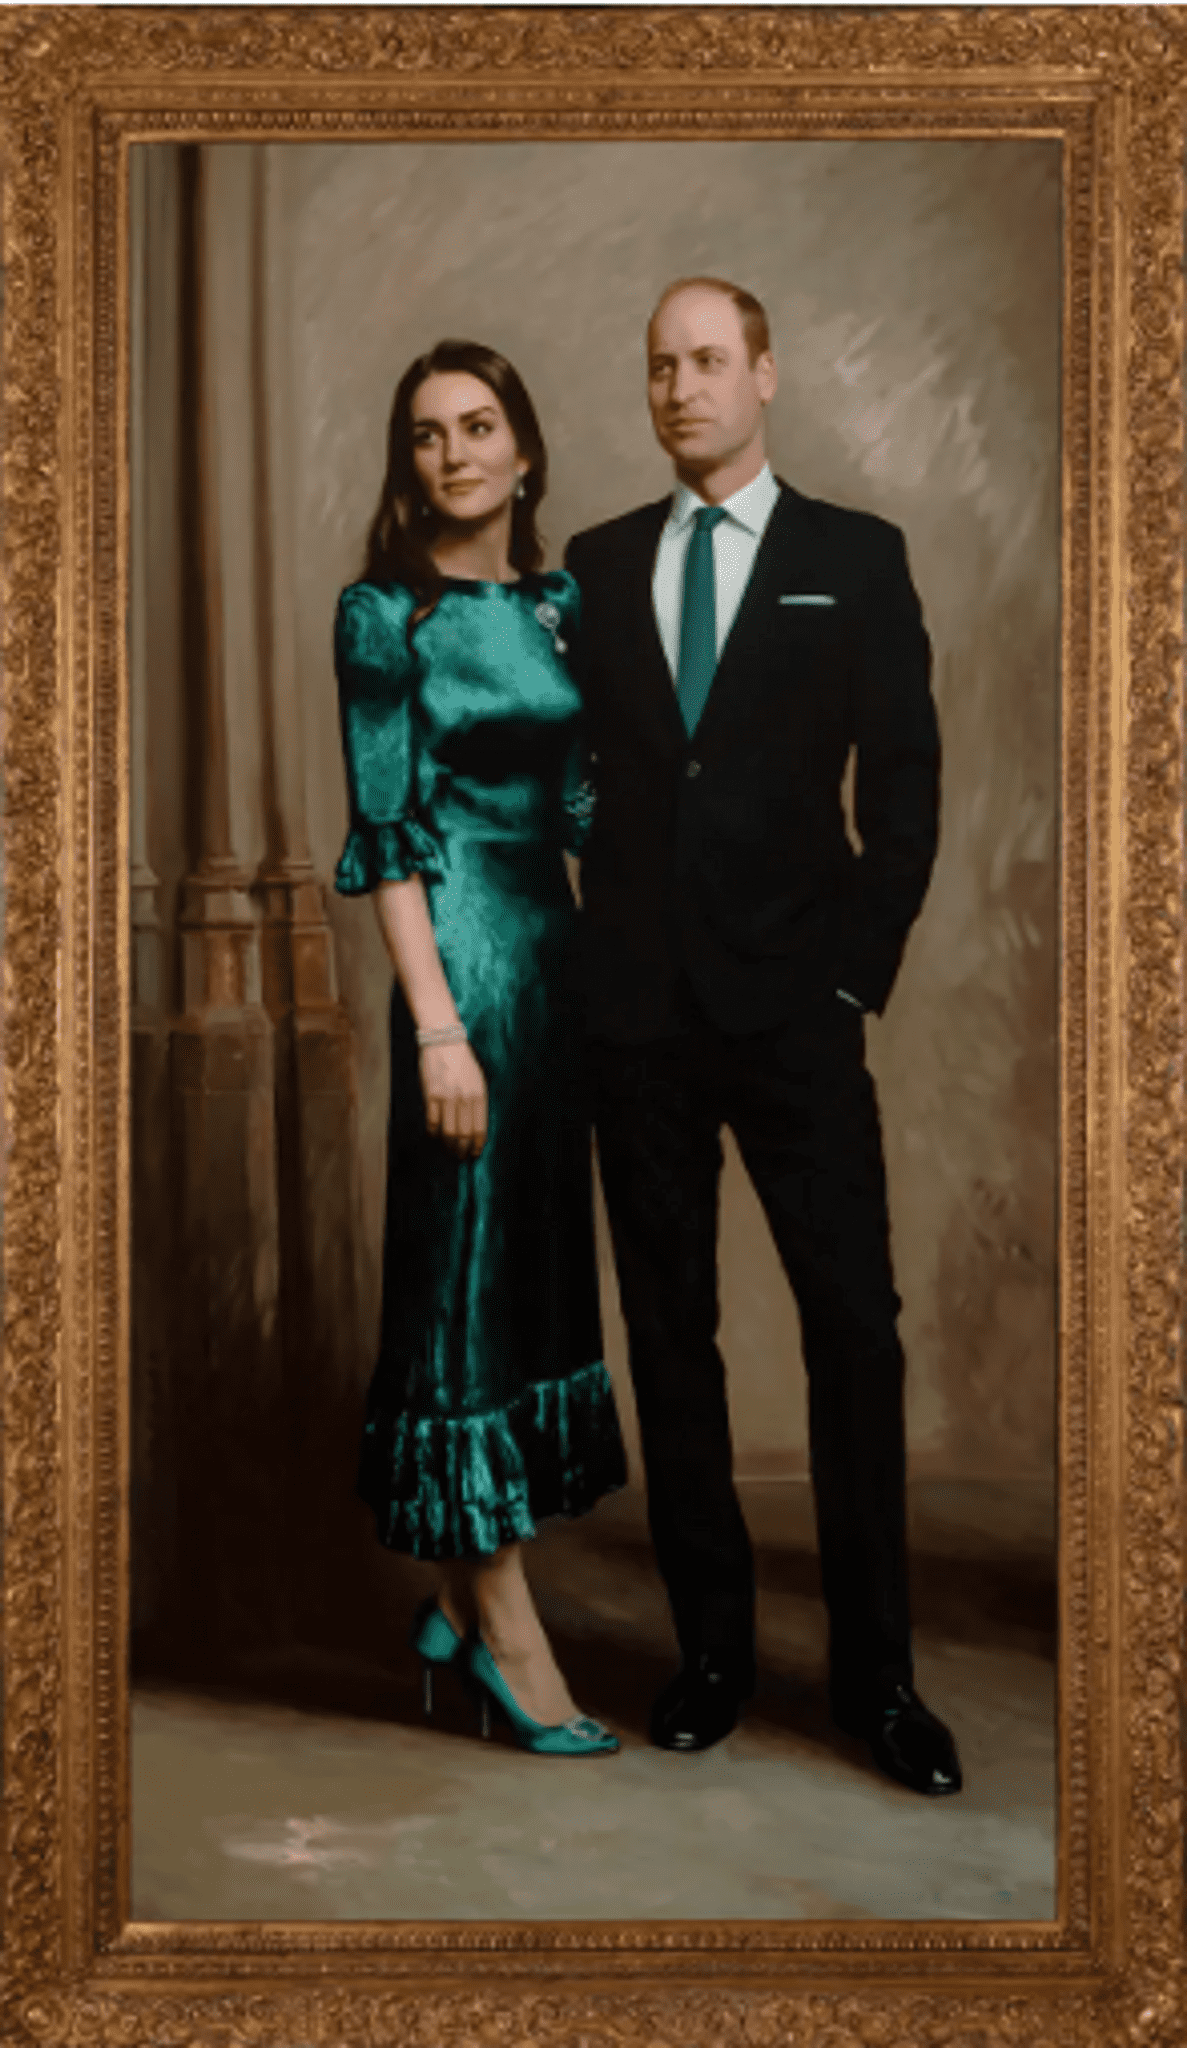 royal-foundation-reveals-the-first-official-portrait-of-kate-middleton-and-prince-william